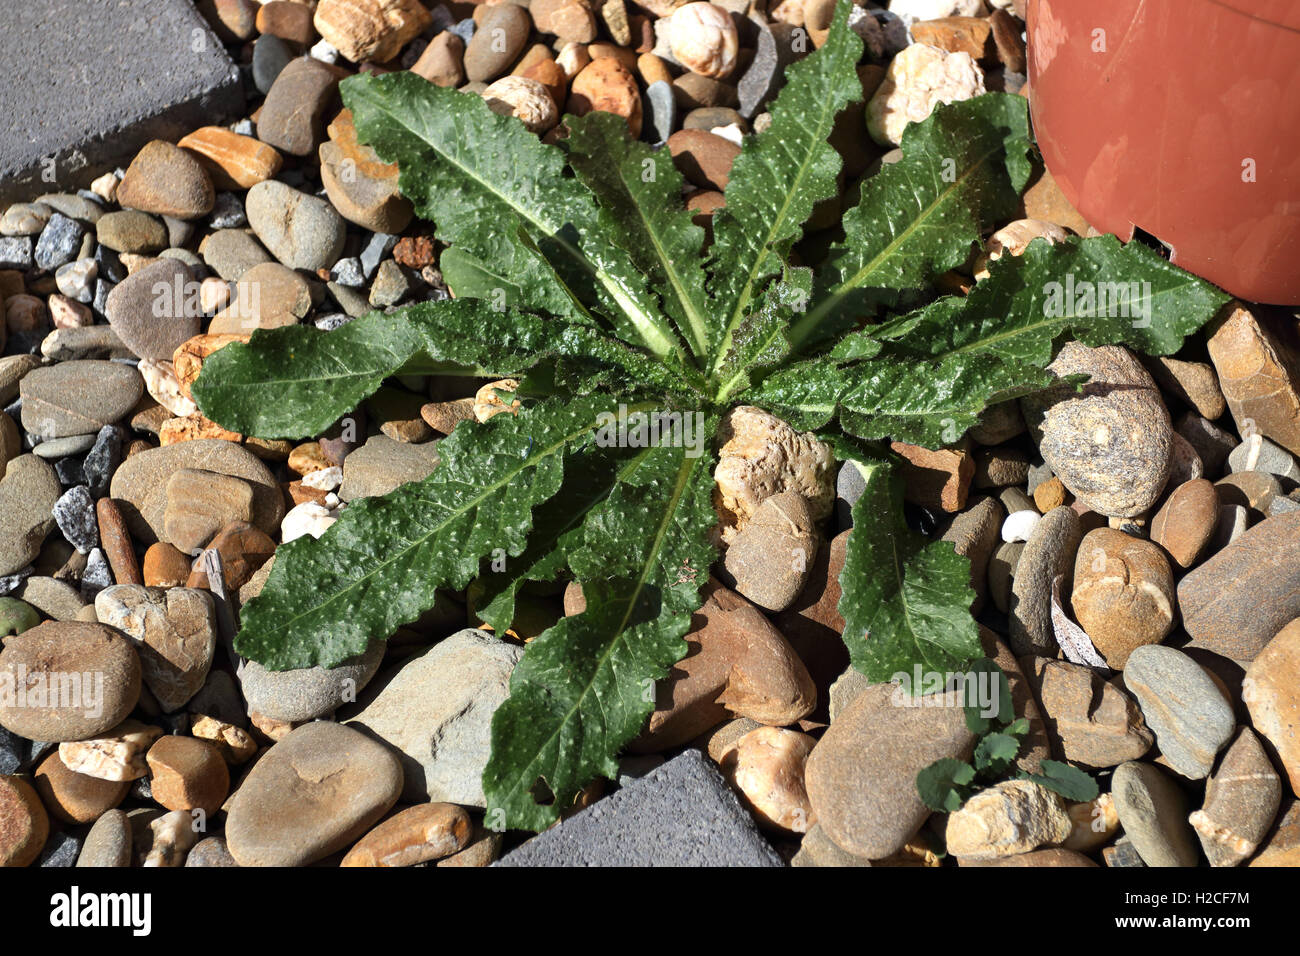 Taraxacum officinale or also known as Dandelion Stock Photo